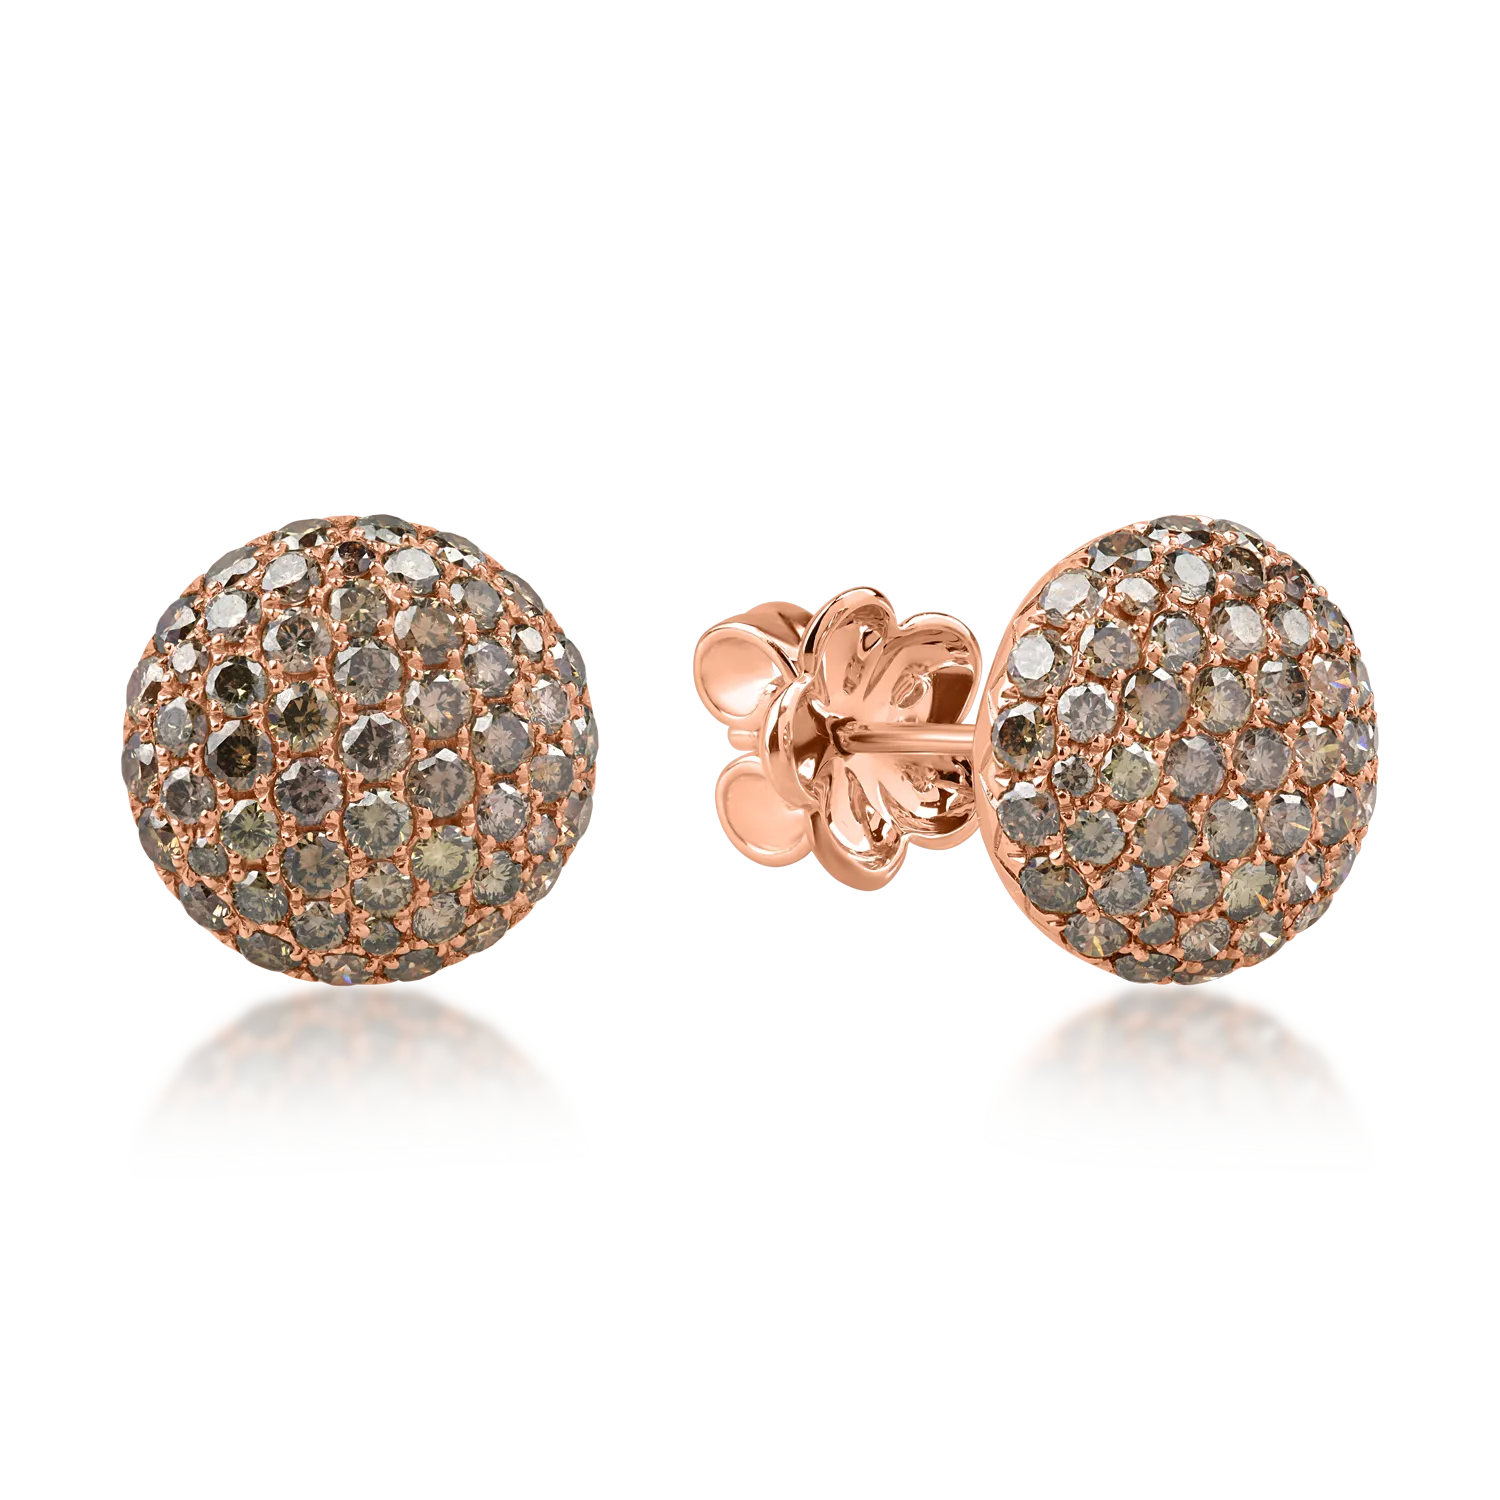 Rose gold earrings with 1.7ct brown diamonds